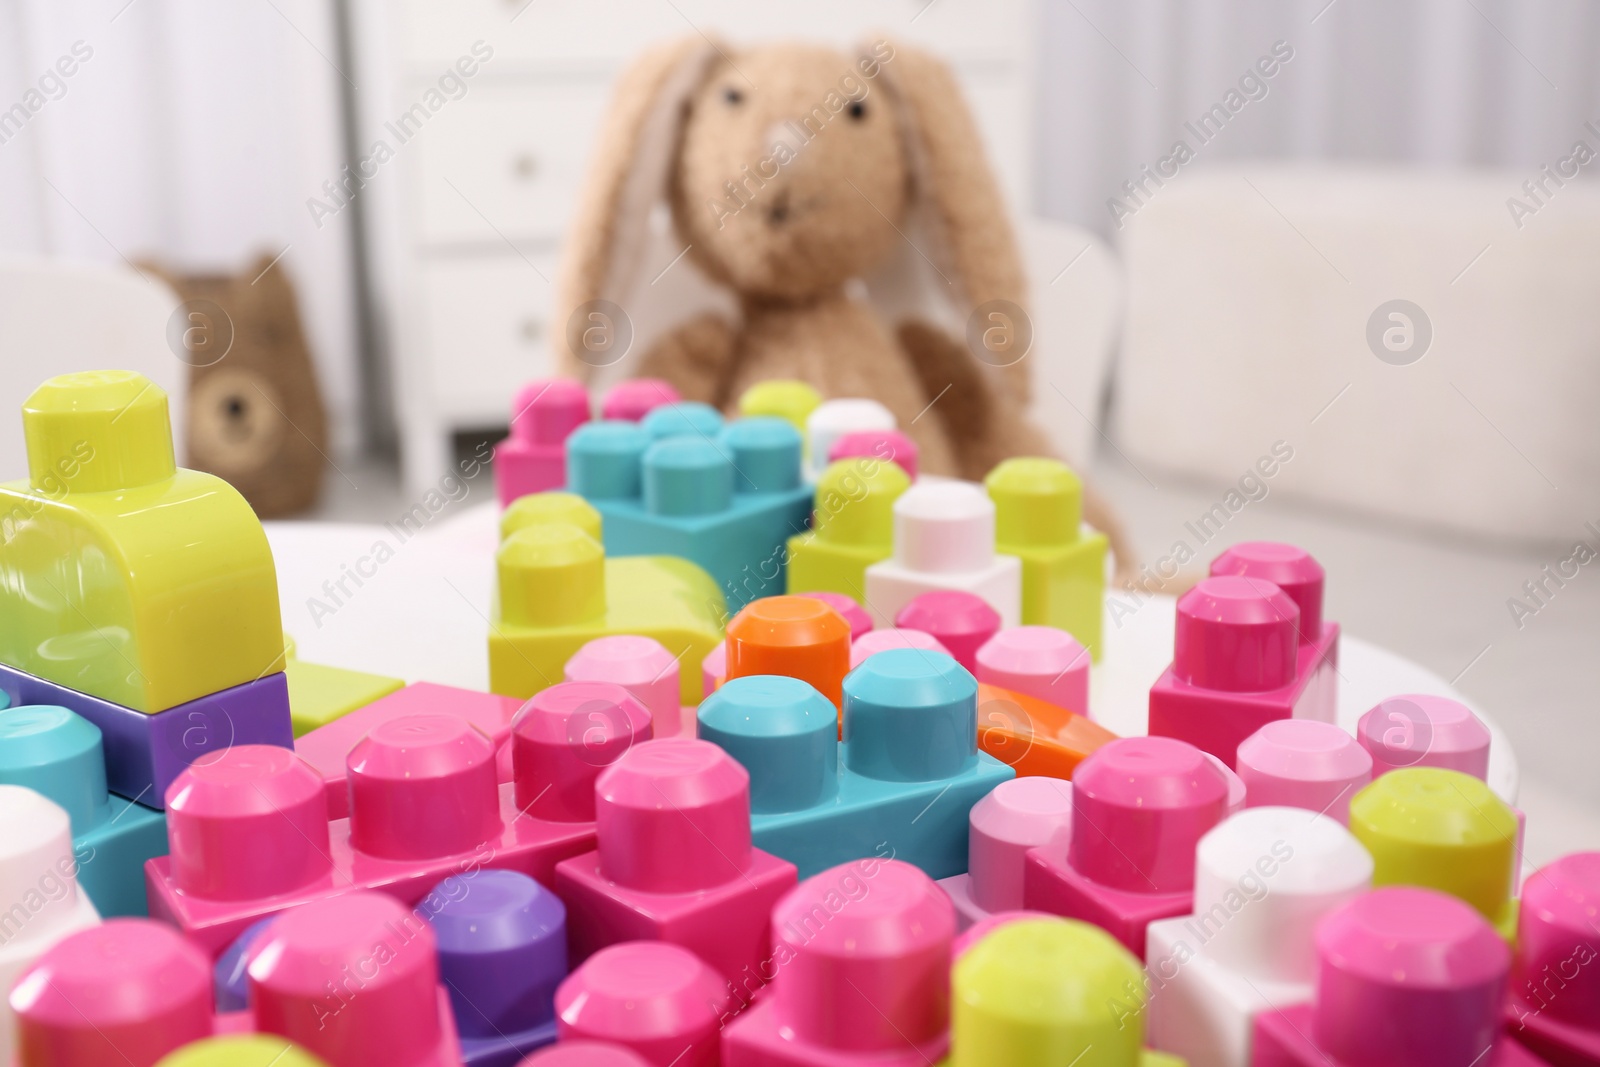 Photo of Many colorful building blocks on table in room, closeup